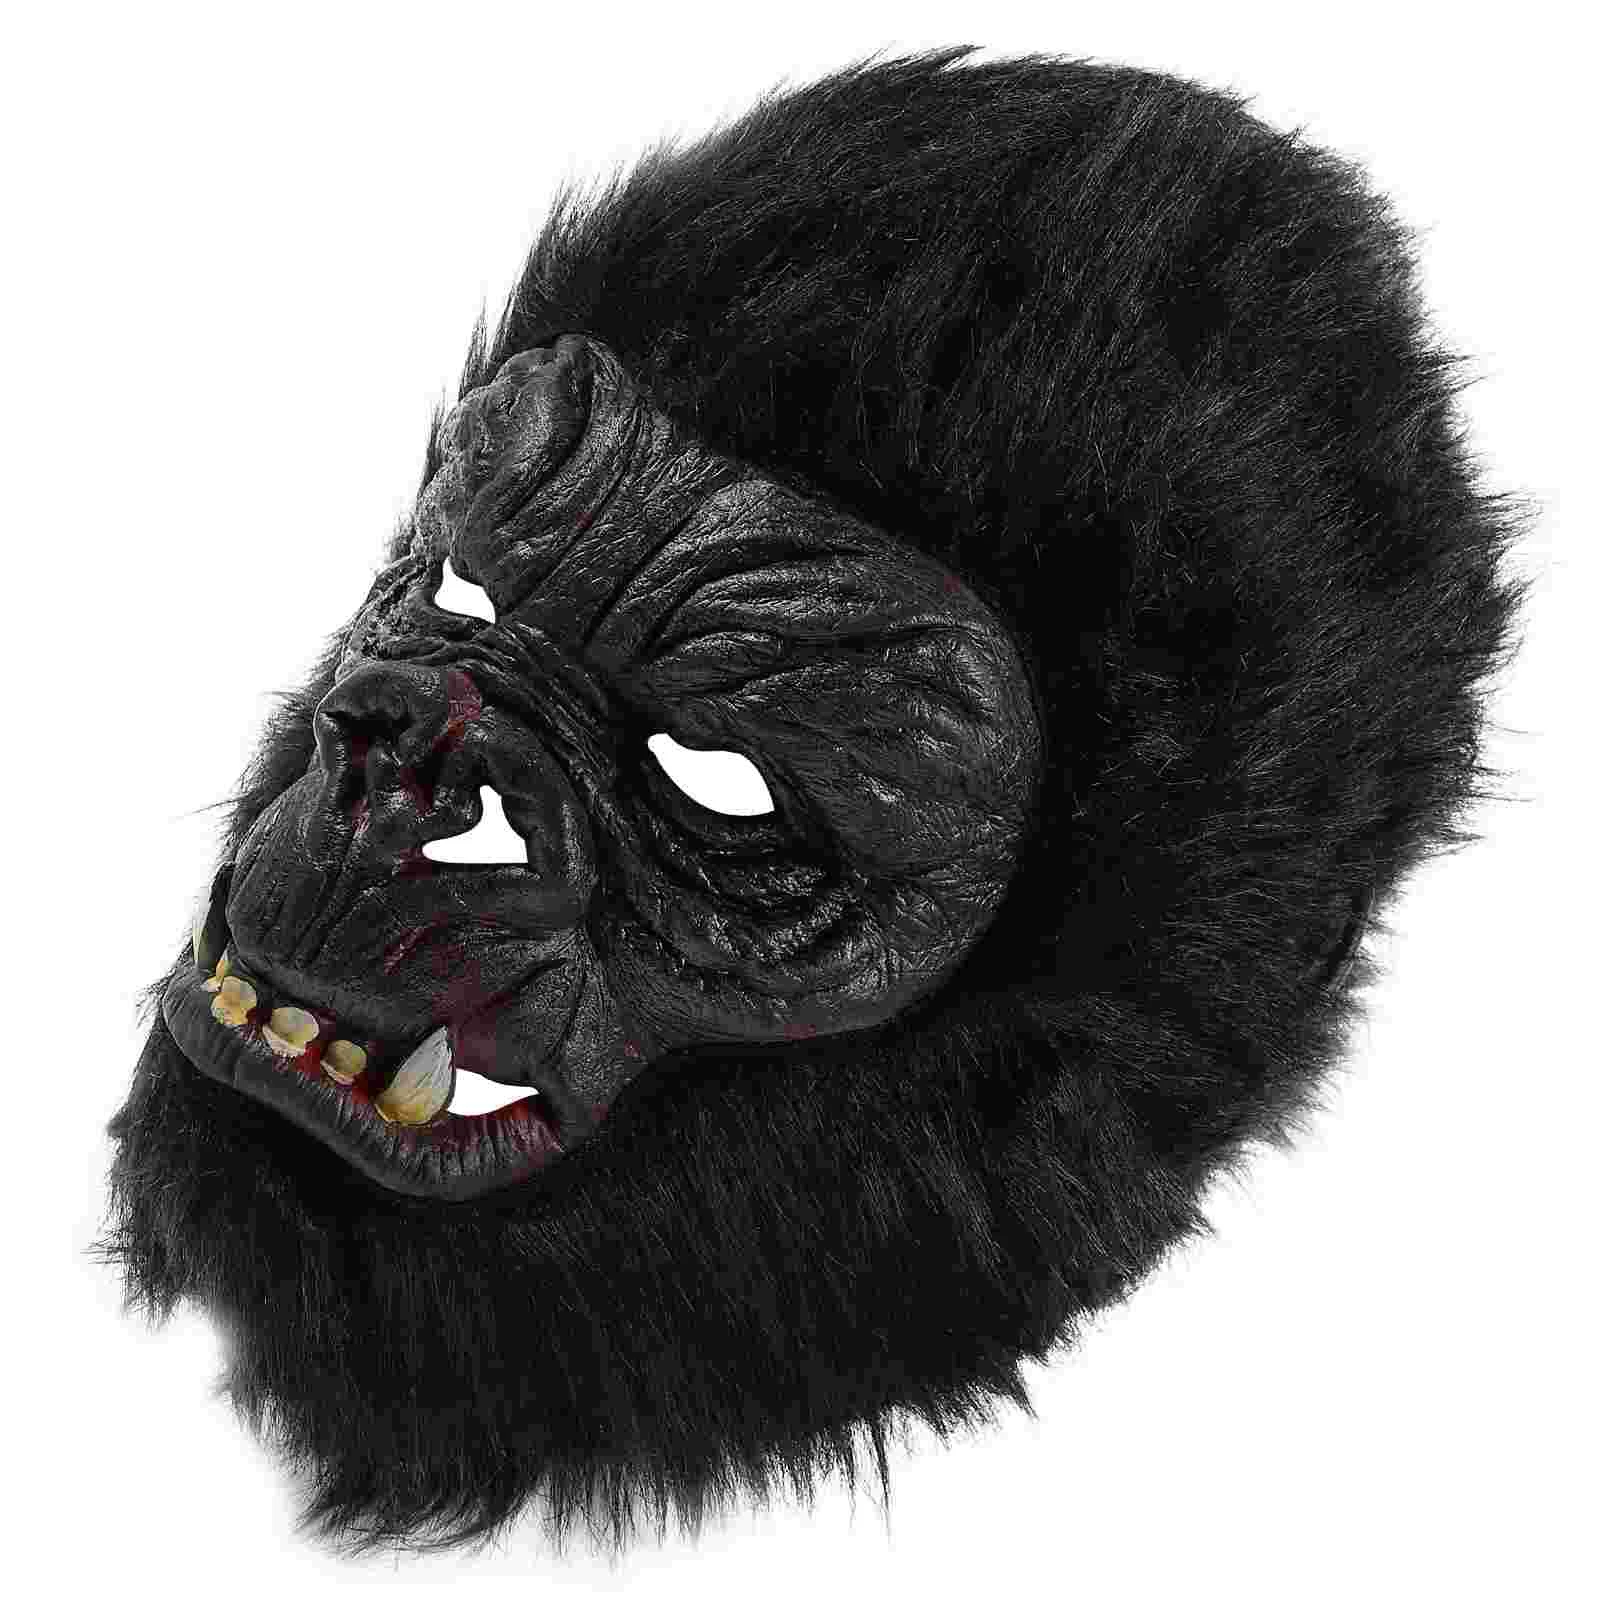 

Masquerade Masquerade Mask Animal Gorilla Head Novelty Halloween Dressing Up Costume For Party Props